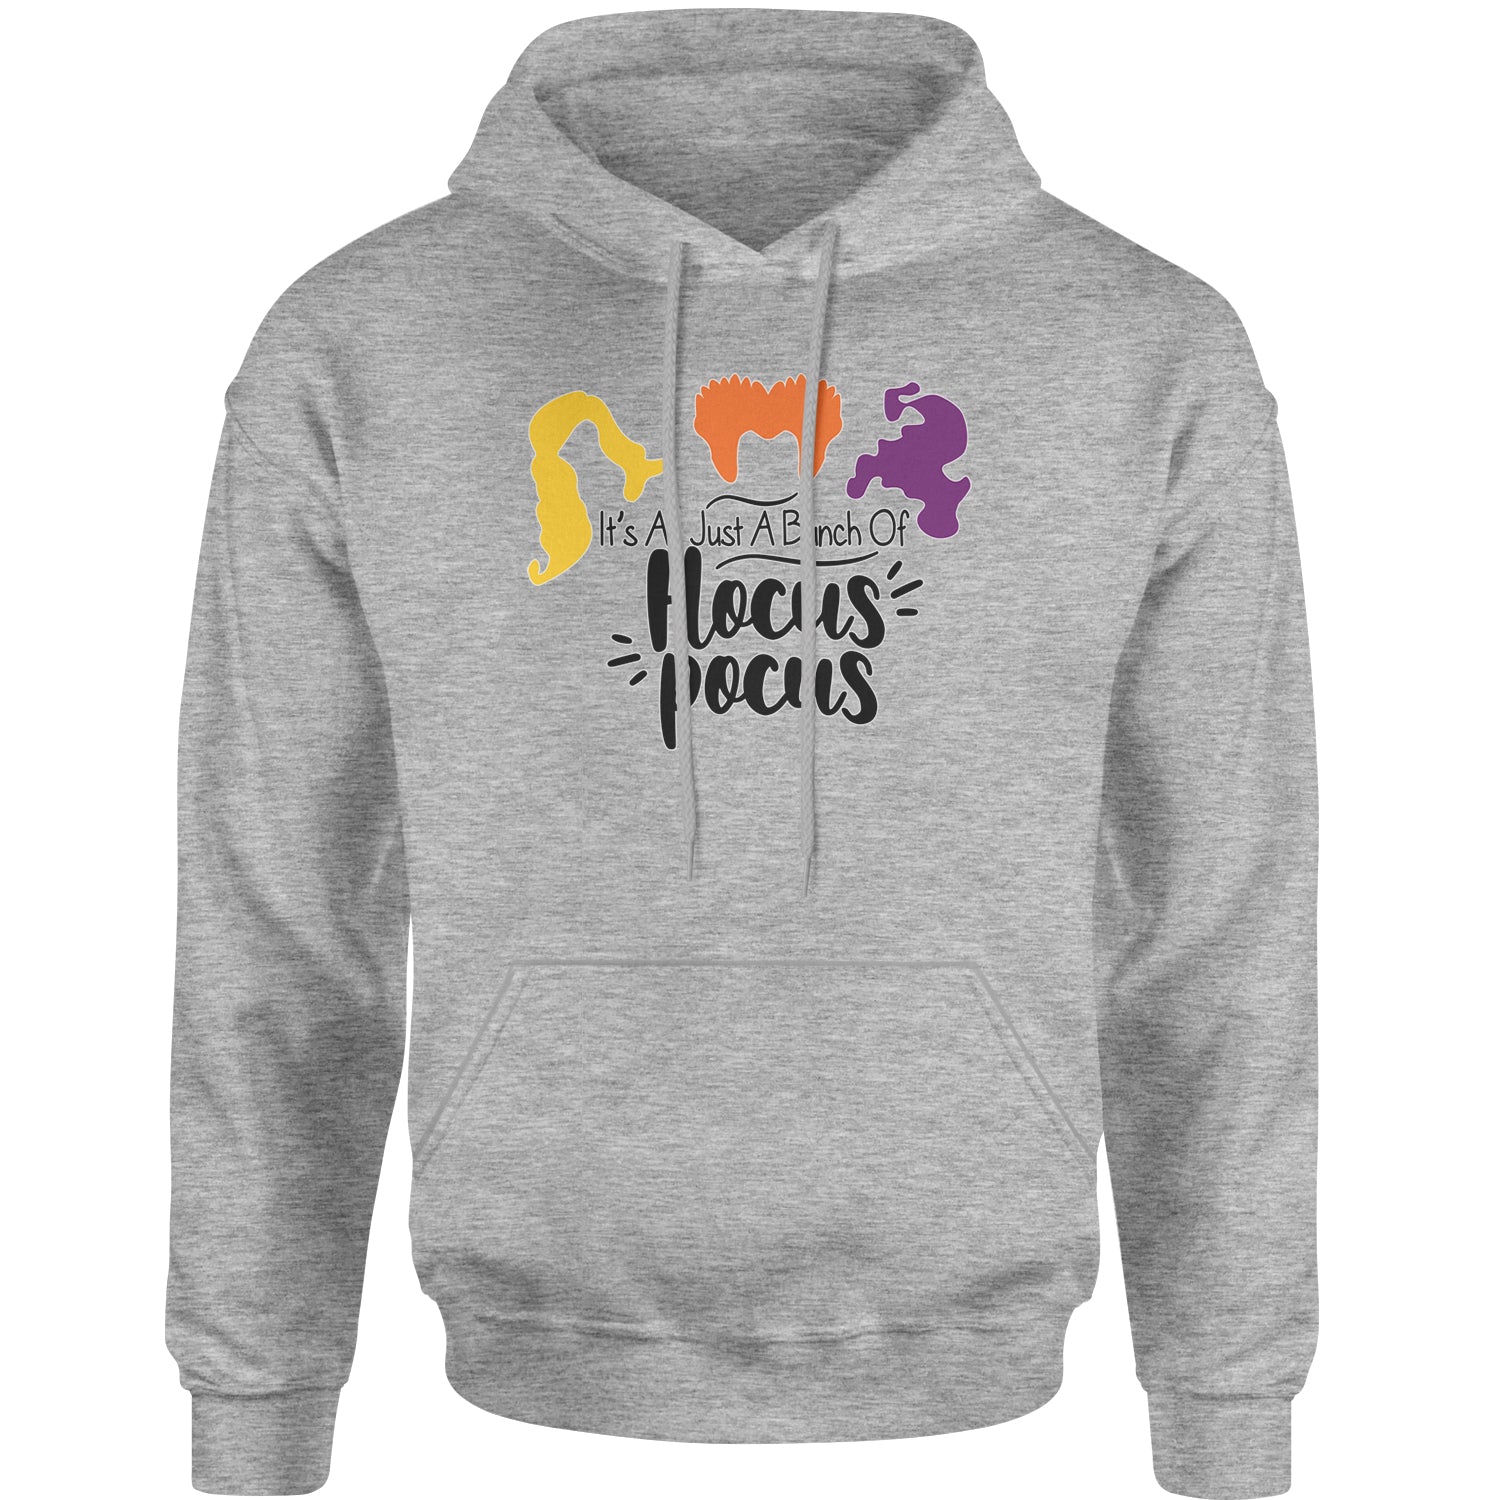 It's Just A Bunch Of Hocus Pocus Adult Hoodie Sweatshirt descendants, enchanted, eve, hallows, hocus, or, pocus, sanderson, sisters, treat, trick, witches by Expression Tees